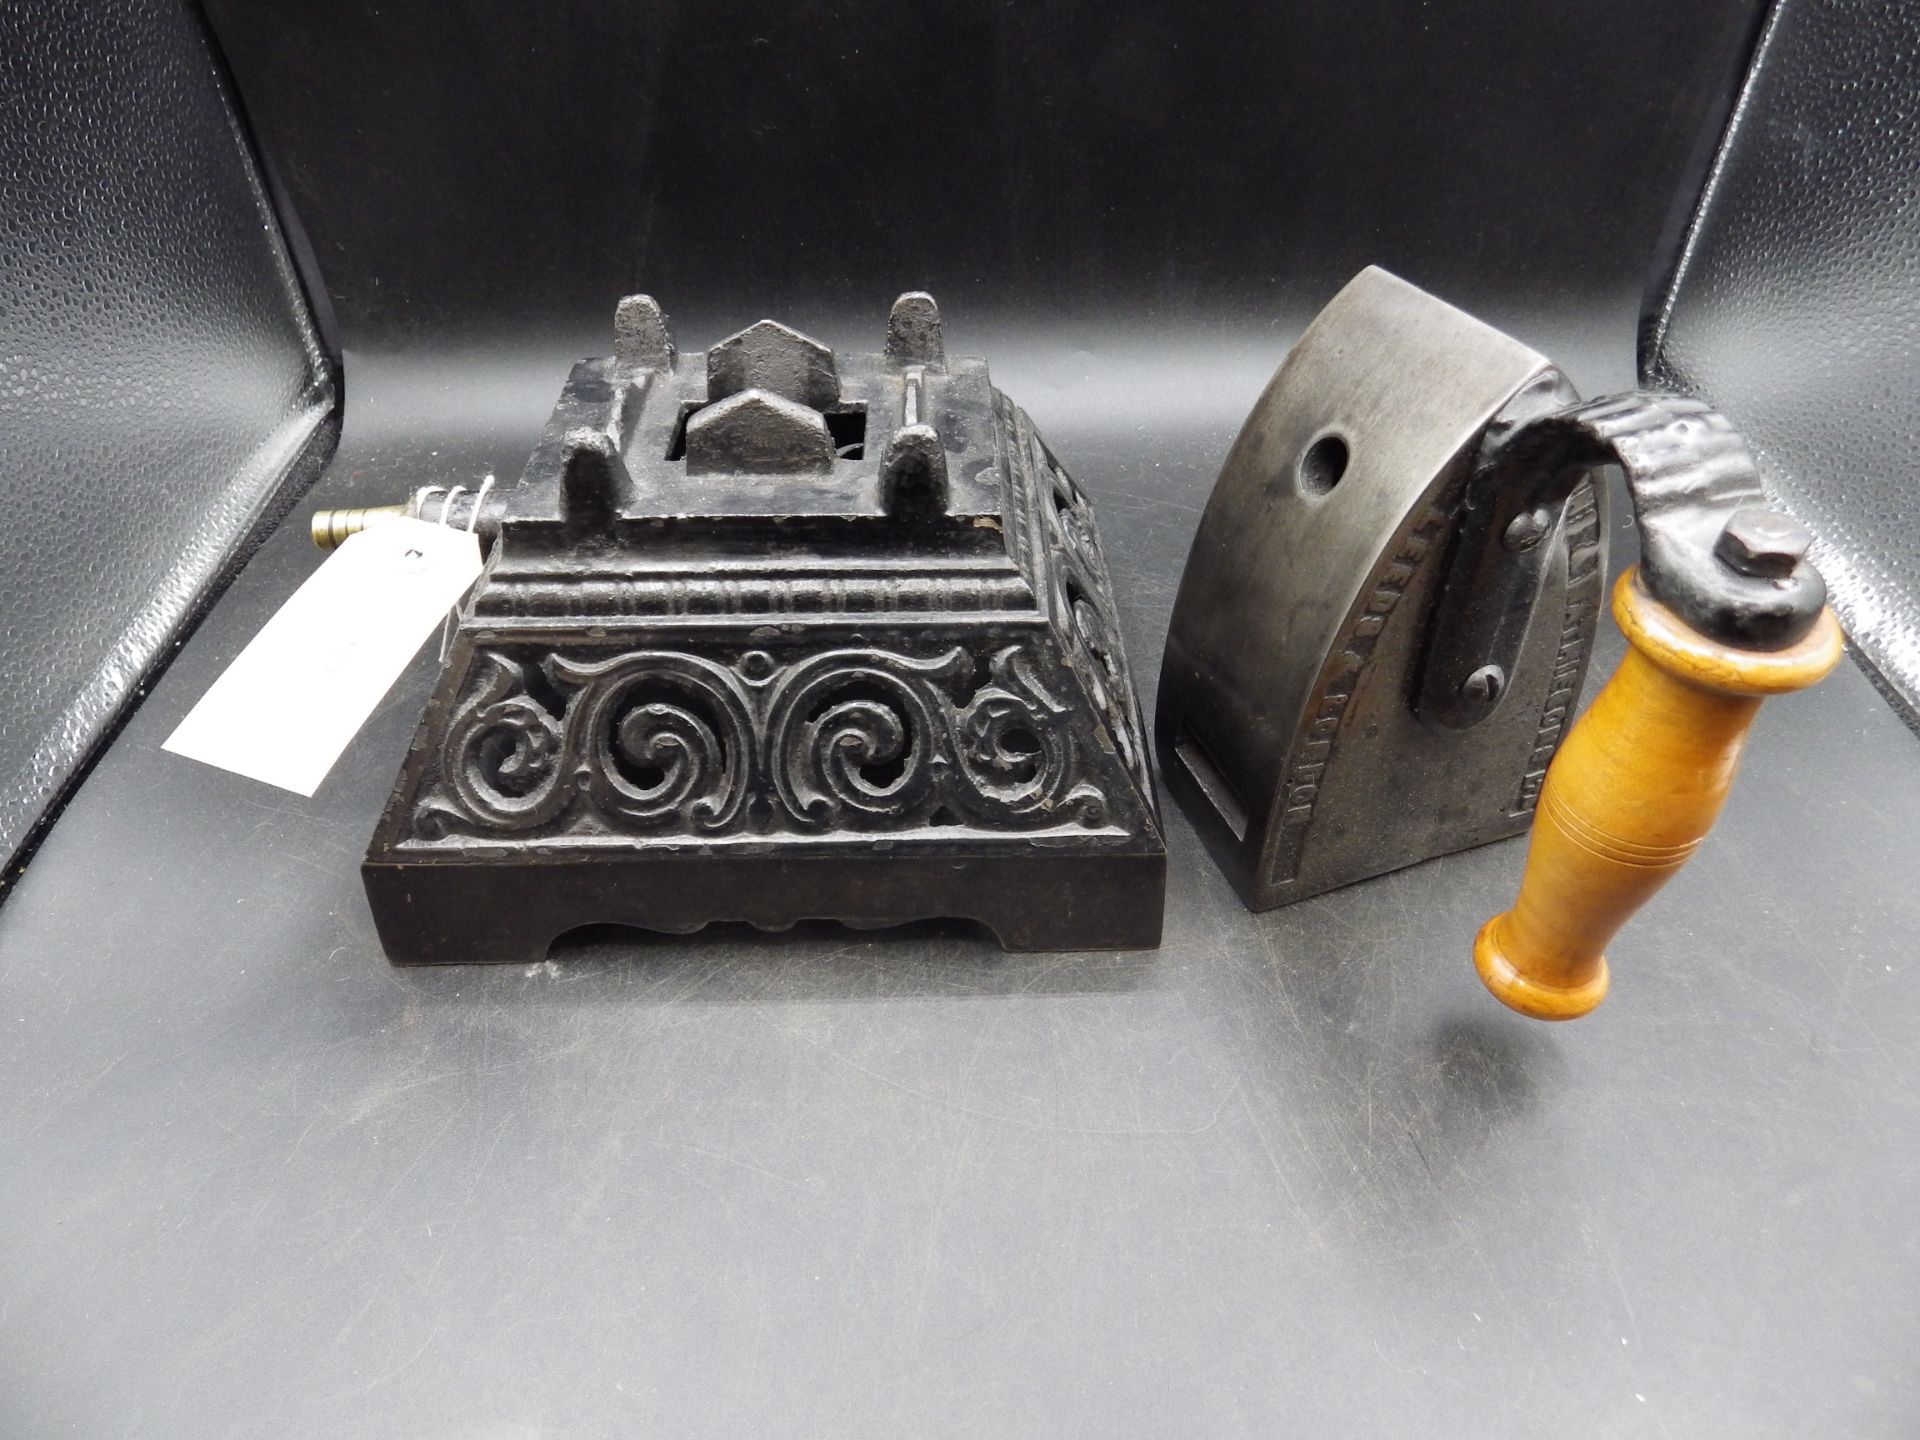 Wilson & Mathieson Ltd cast iron stove together with gas iron (bought by vendor from the USA)